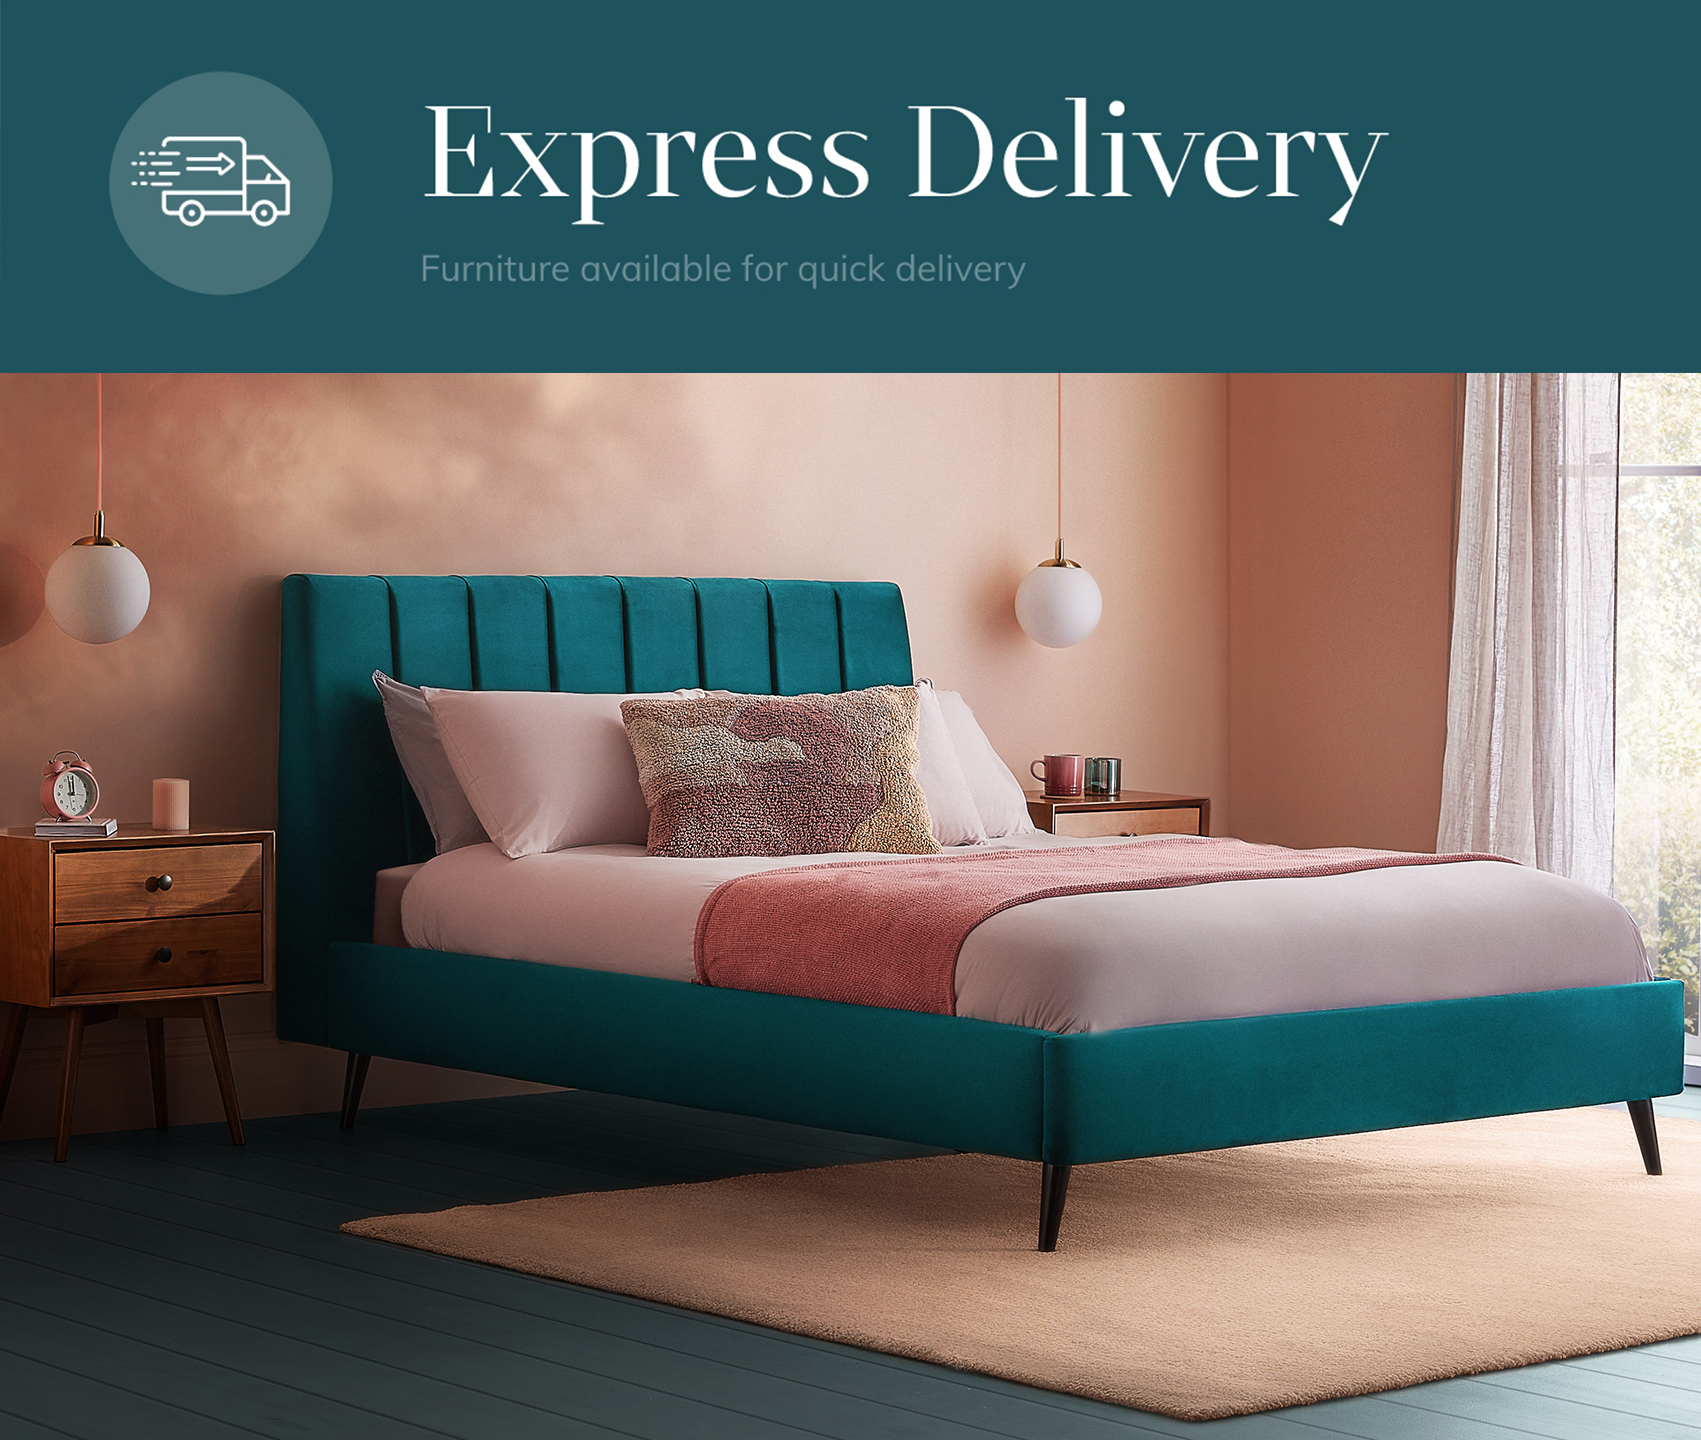 ExpressDelivery_Mobile_Beds